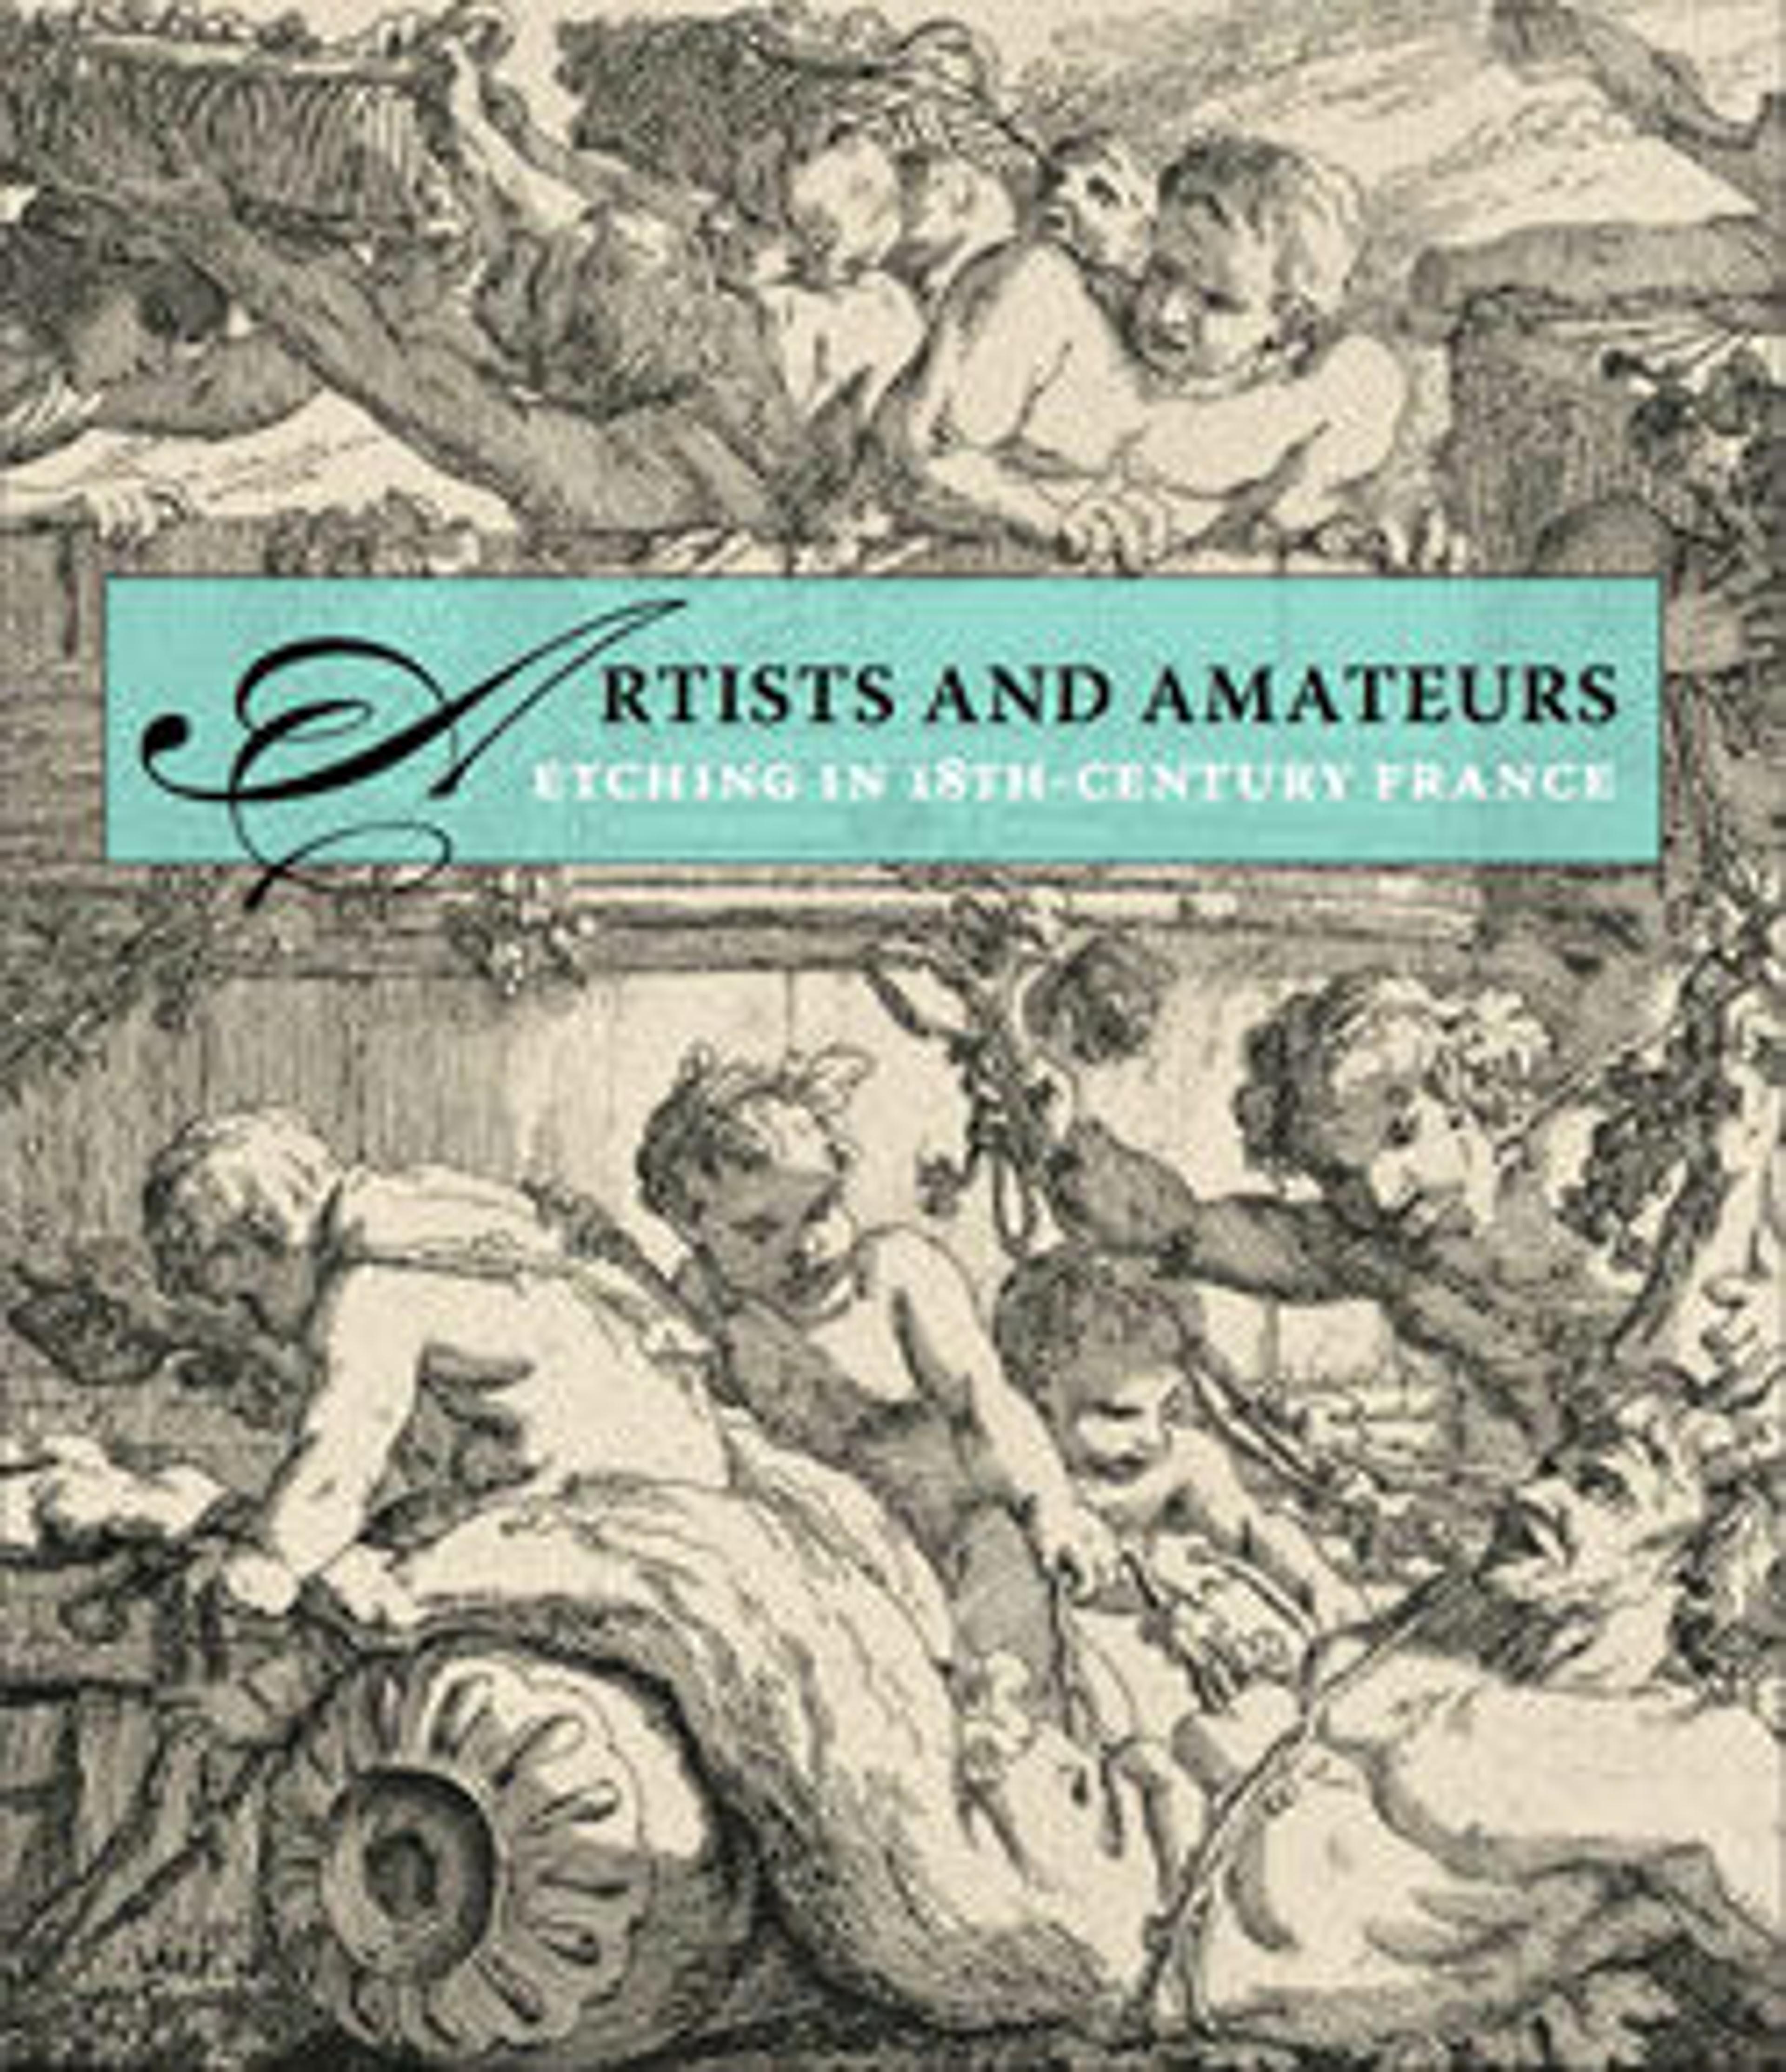 The Art of Etching in Eighteenth-Century France